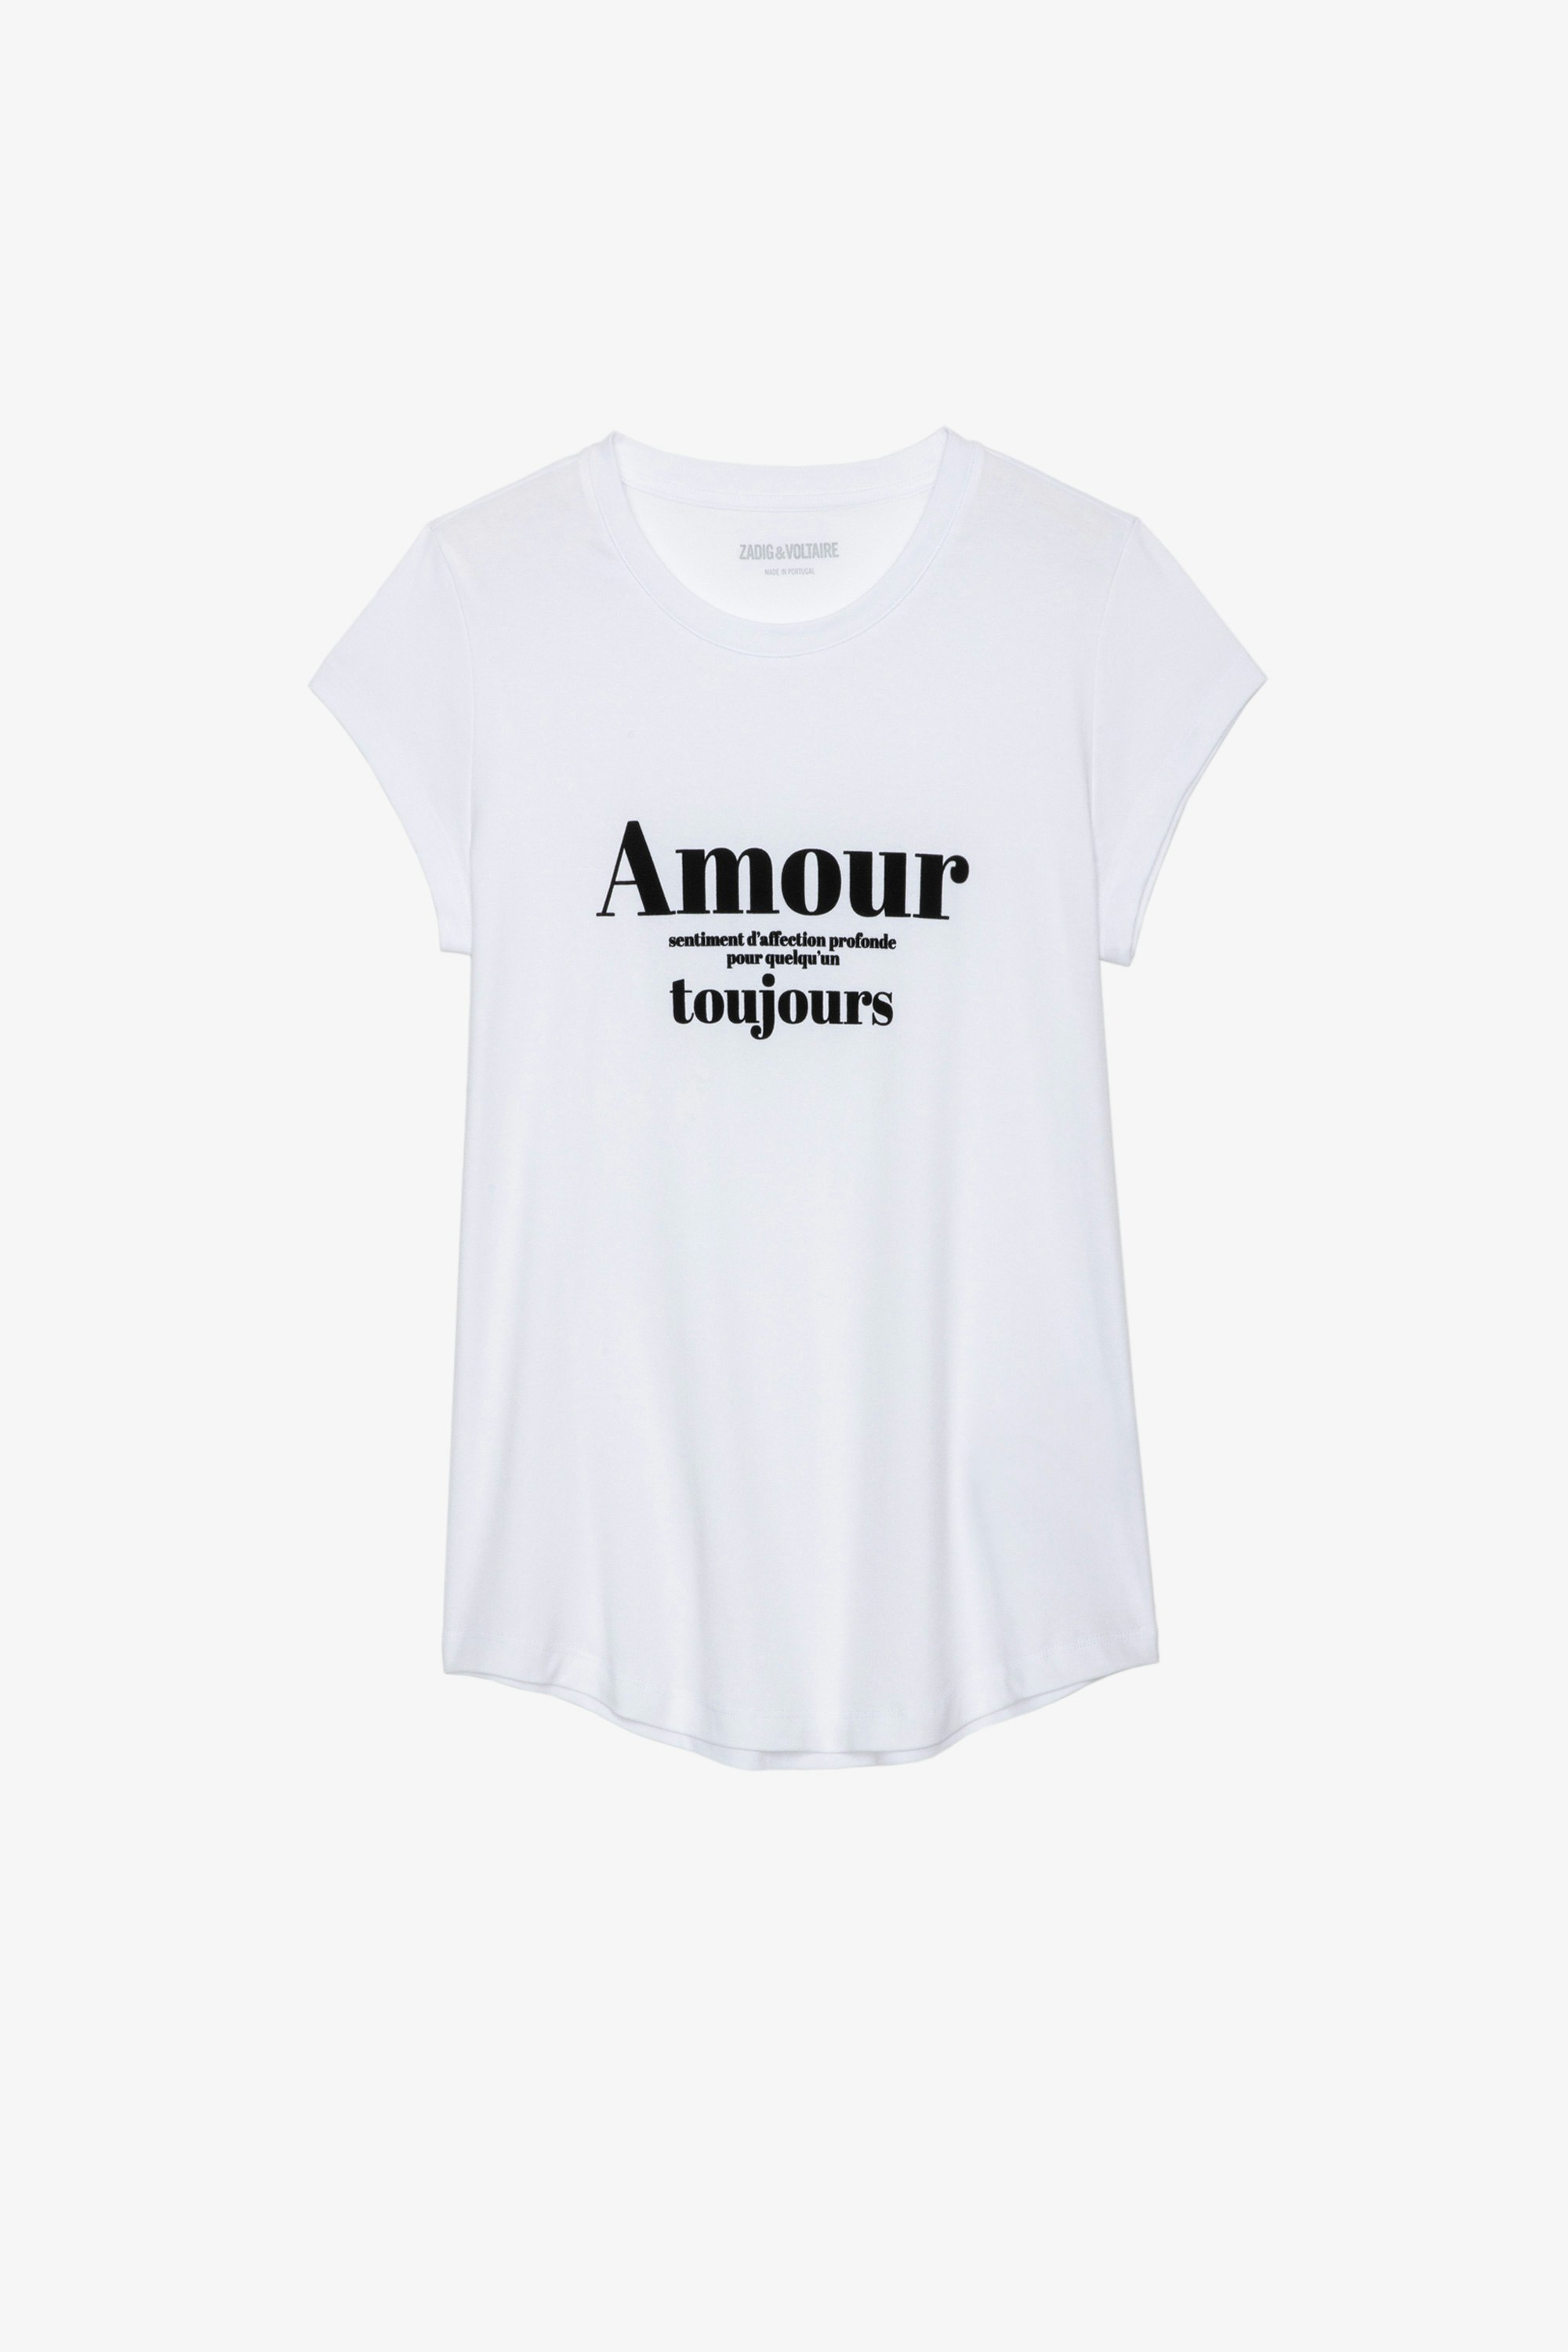 Skinny Amour Toujours T-Shirt Women’s white cotton T-shirt with contrasting “Amour Toujours” print